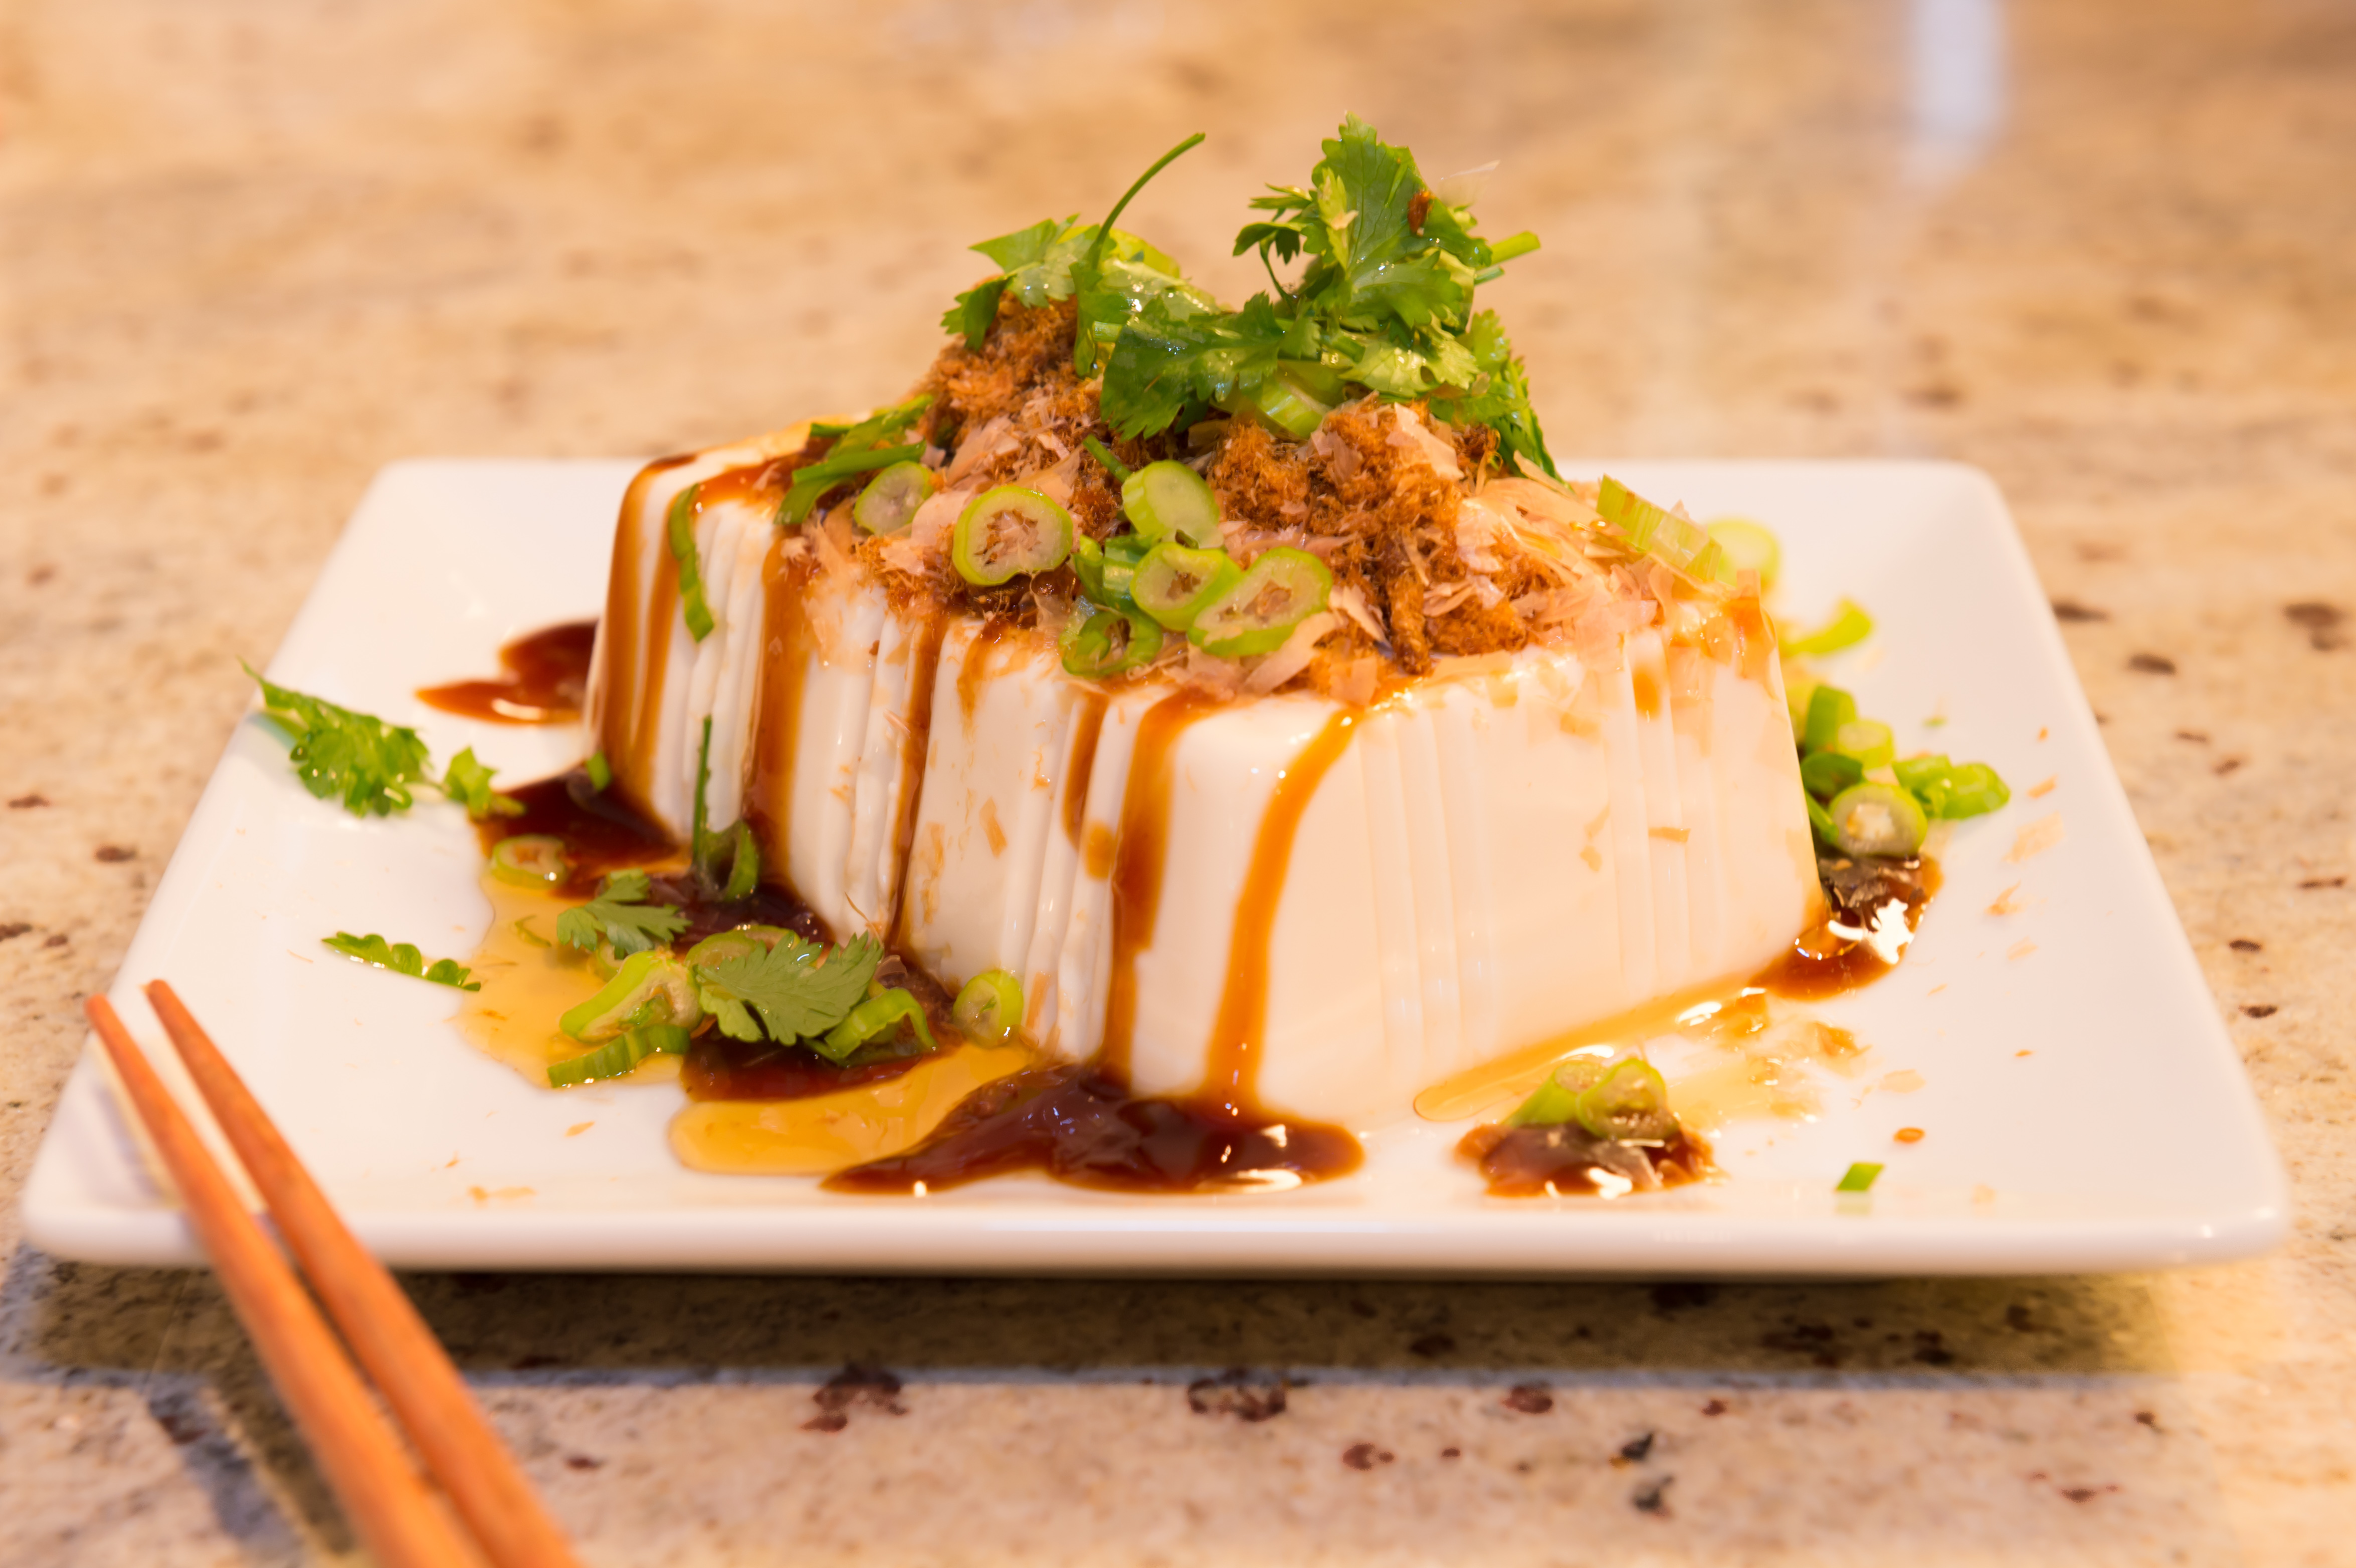 Cold tofu top with spring onions/cilantro bonito flakes and soy paste.